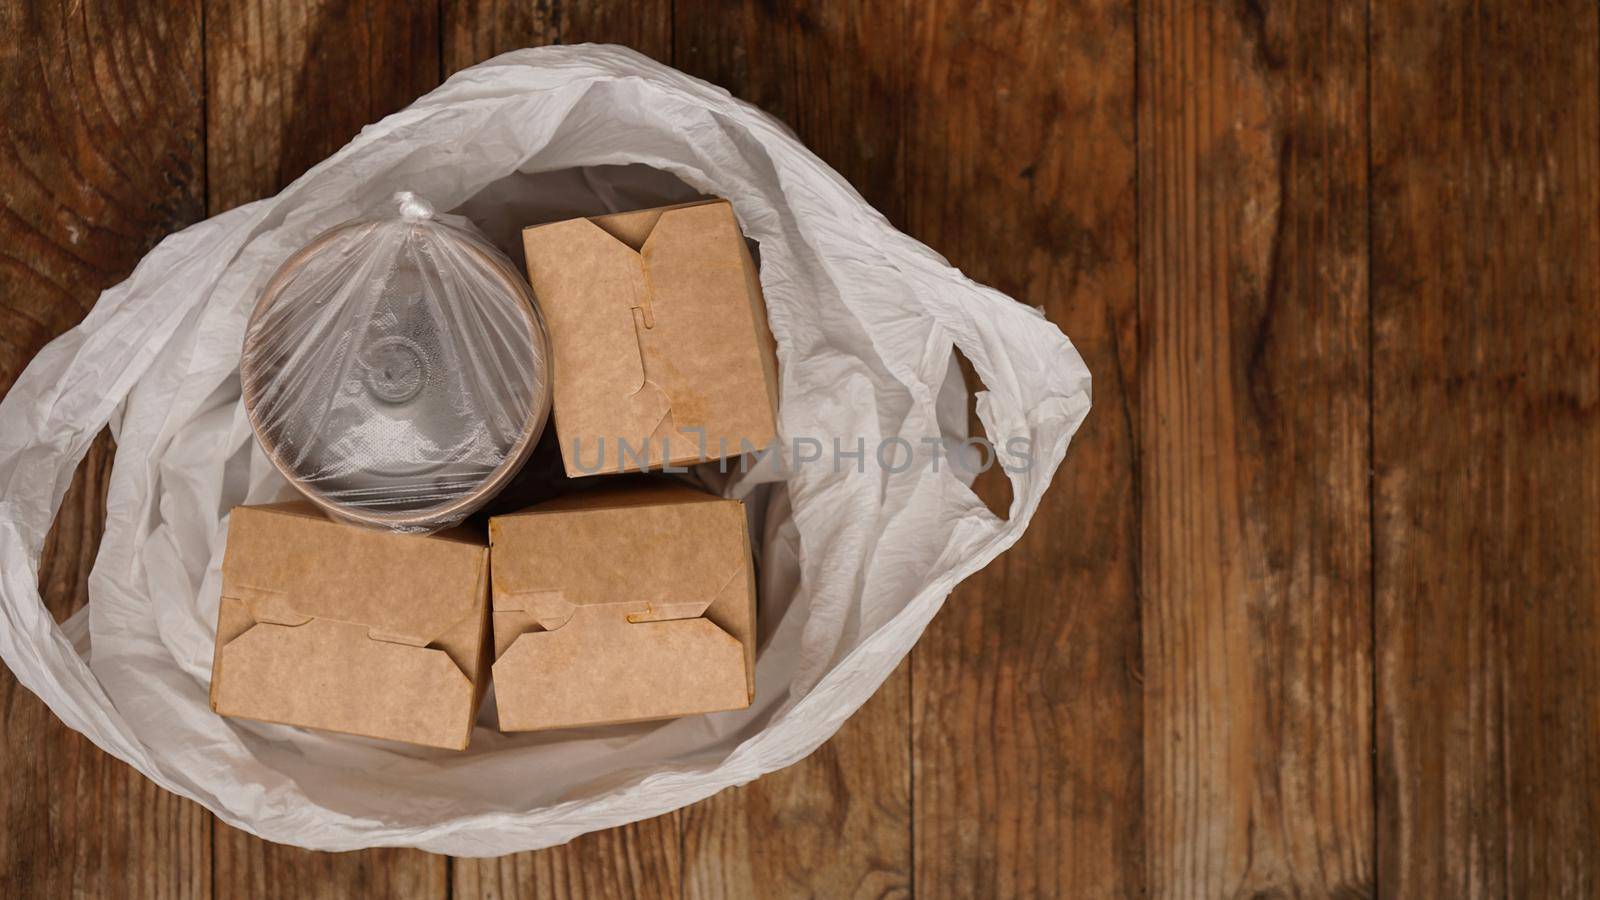 Asian food delivery. Food in containers and in a package on a wooden background by natali_brill